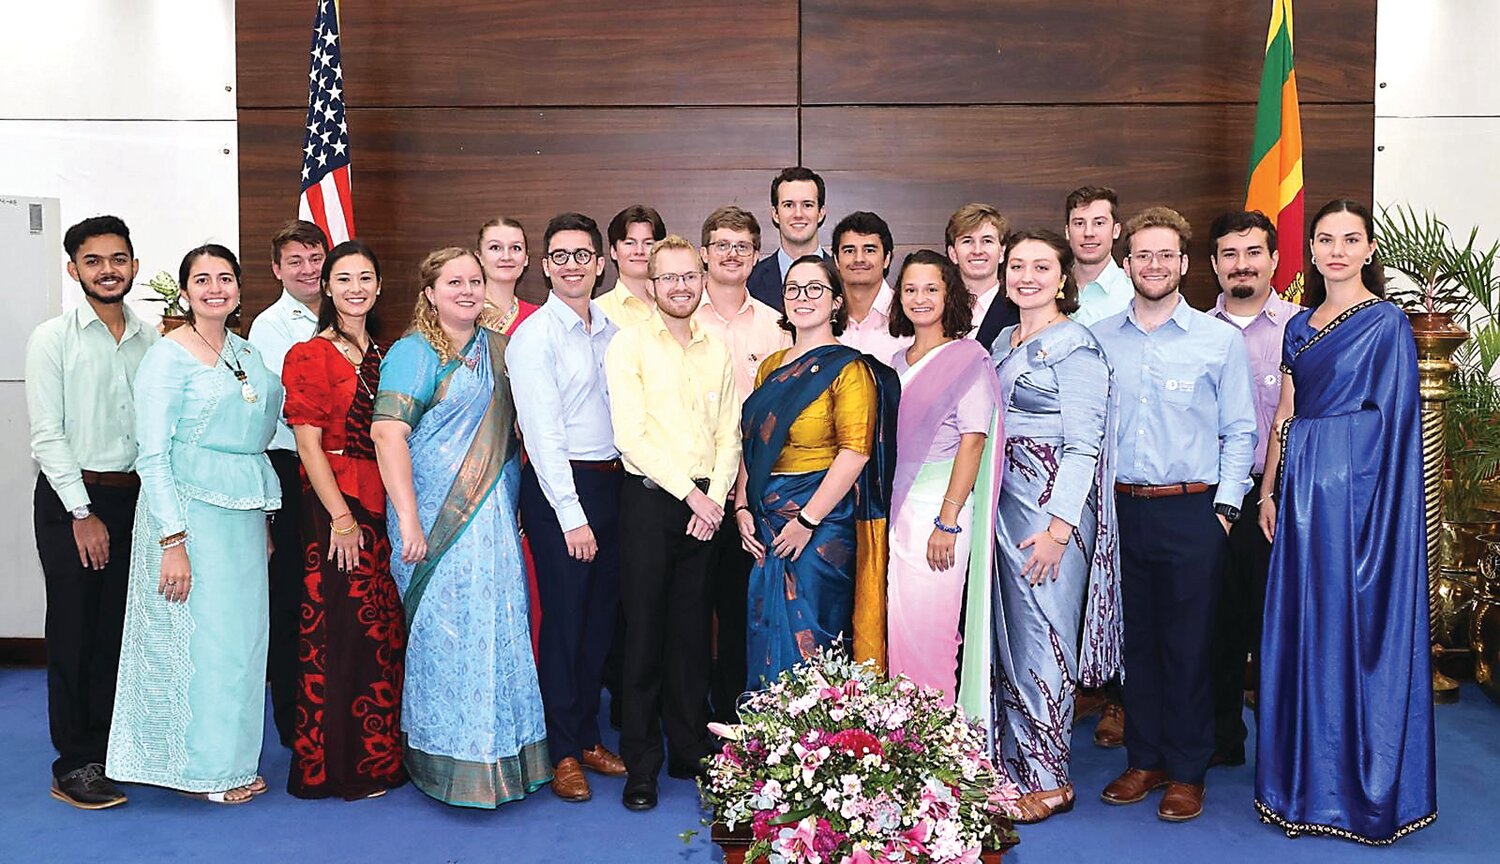 Tresier Mihalik, fifth from left, is one of 20 Peace Corps volunteers who will spend the next two years in Sri Lanka.